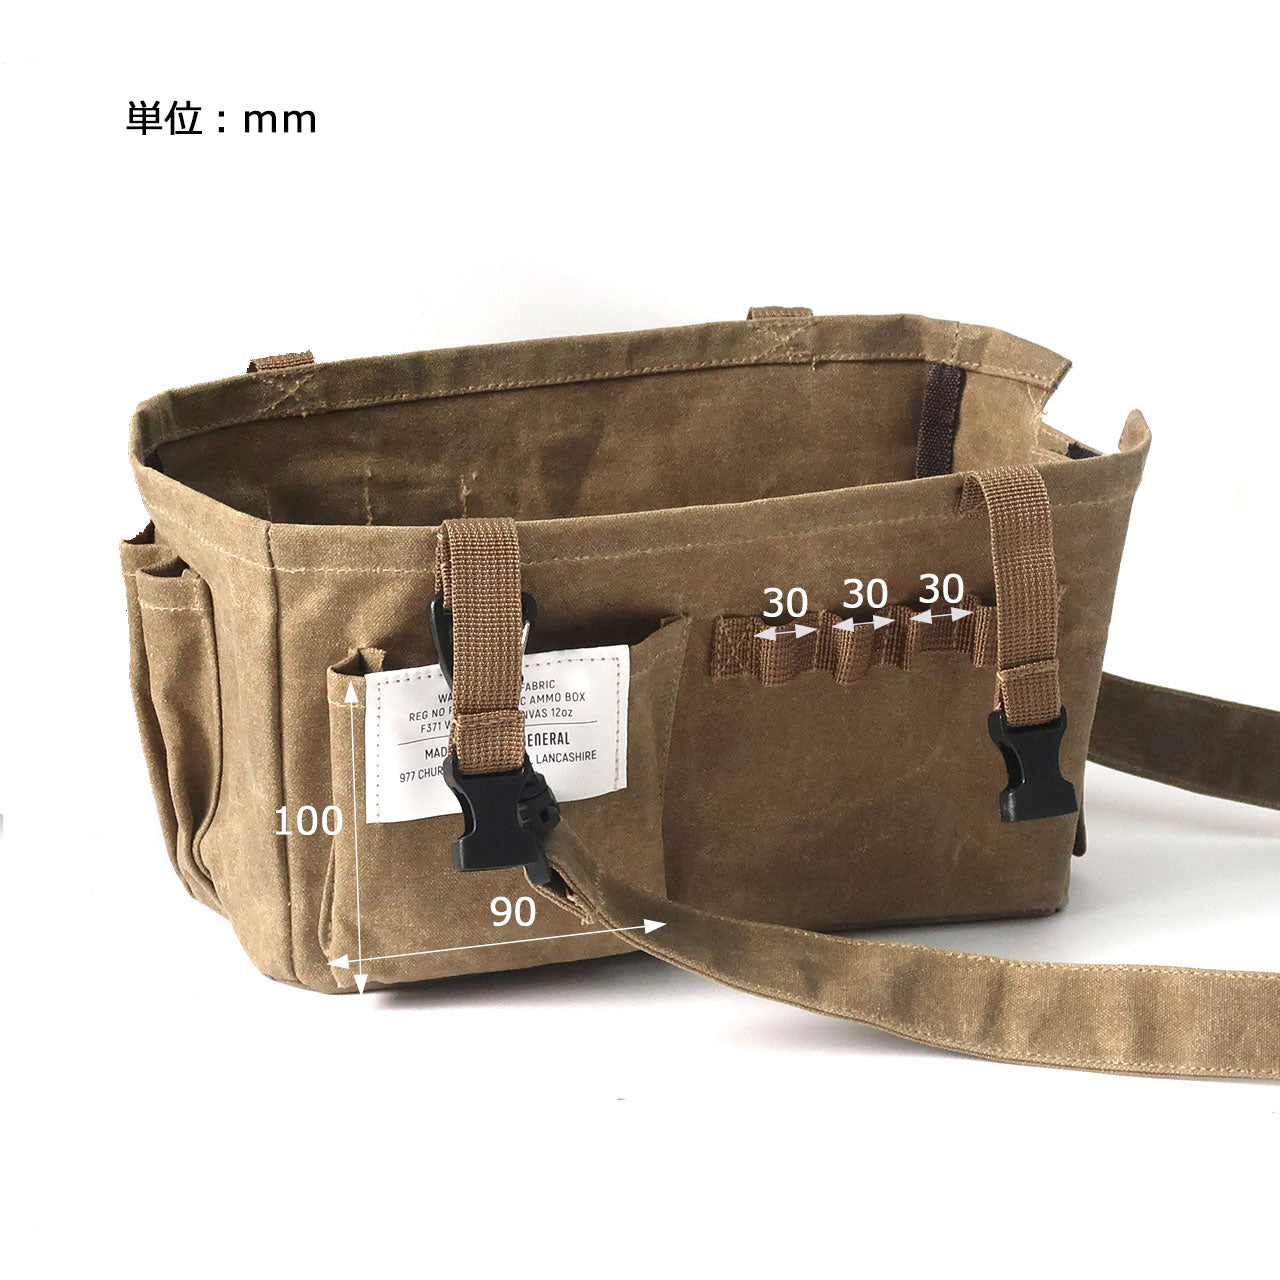 Post General Waxed Canvas Ammo Tool Box - Brown